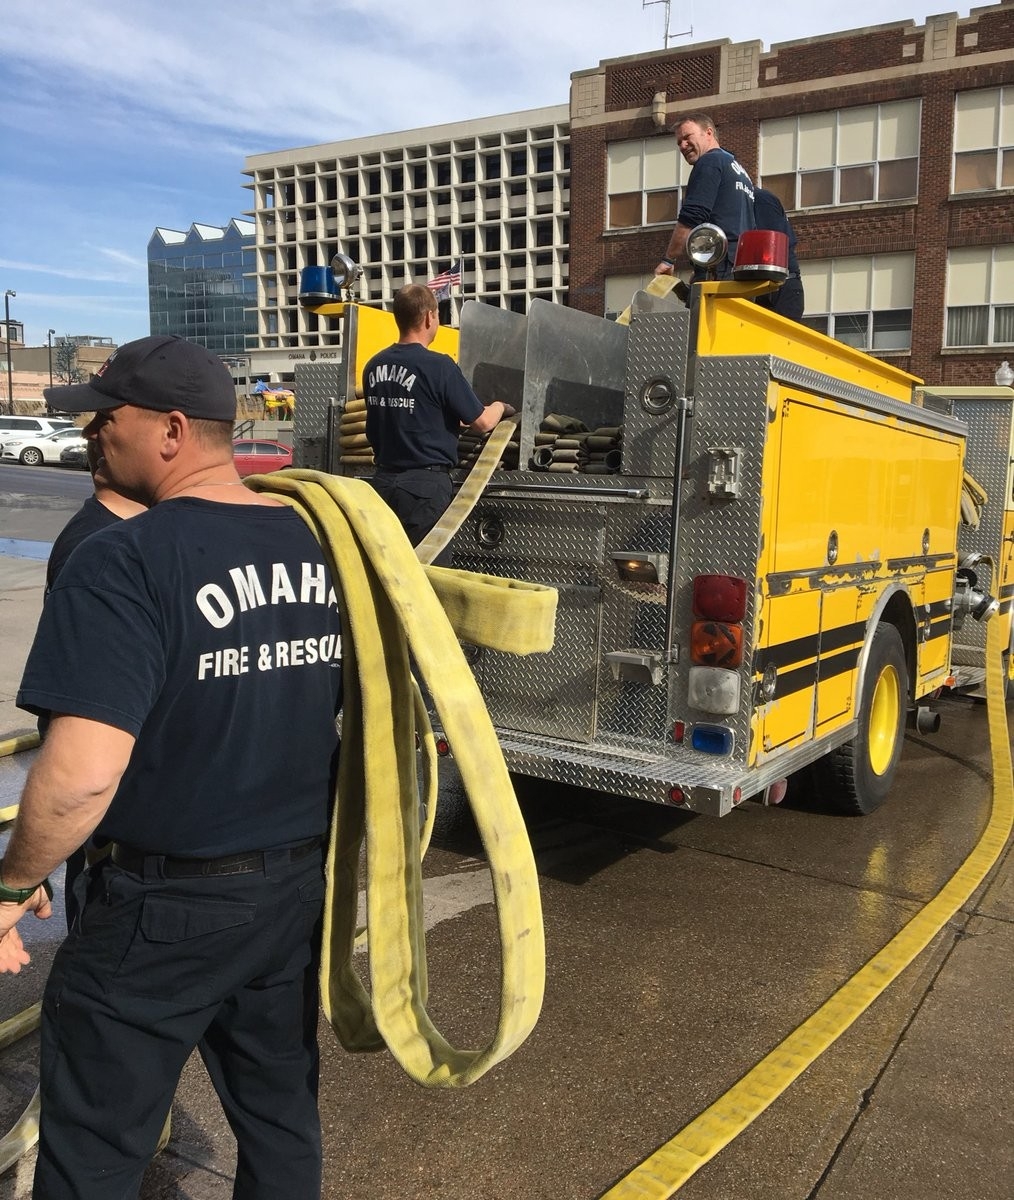 Omaha Fire Dept On Twitter: &quot;a-Shift Firefighters At Central  Omaha Fire Department Shift Schedule